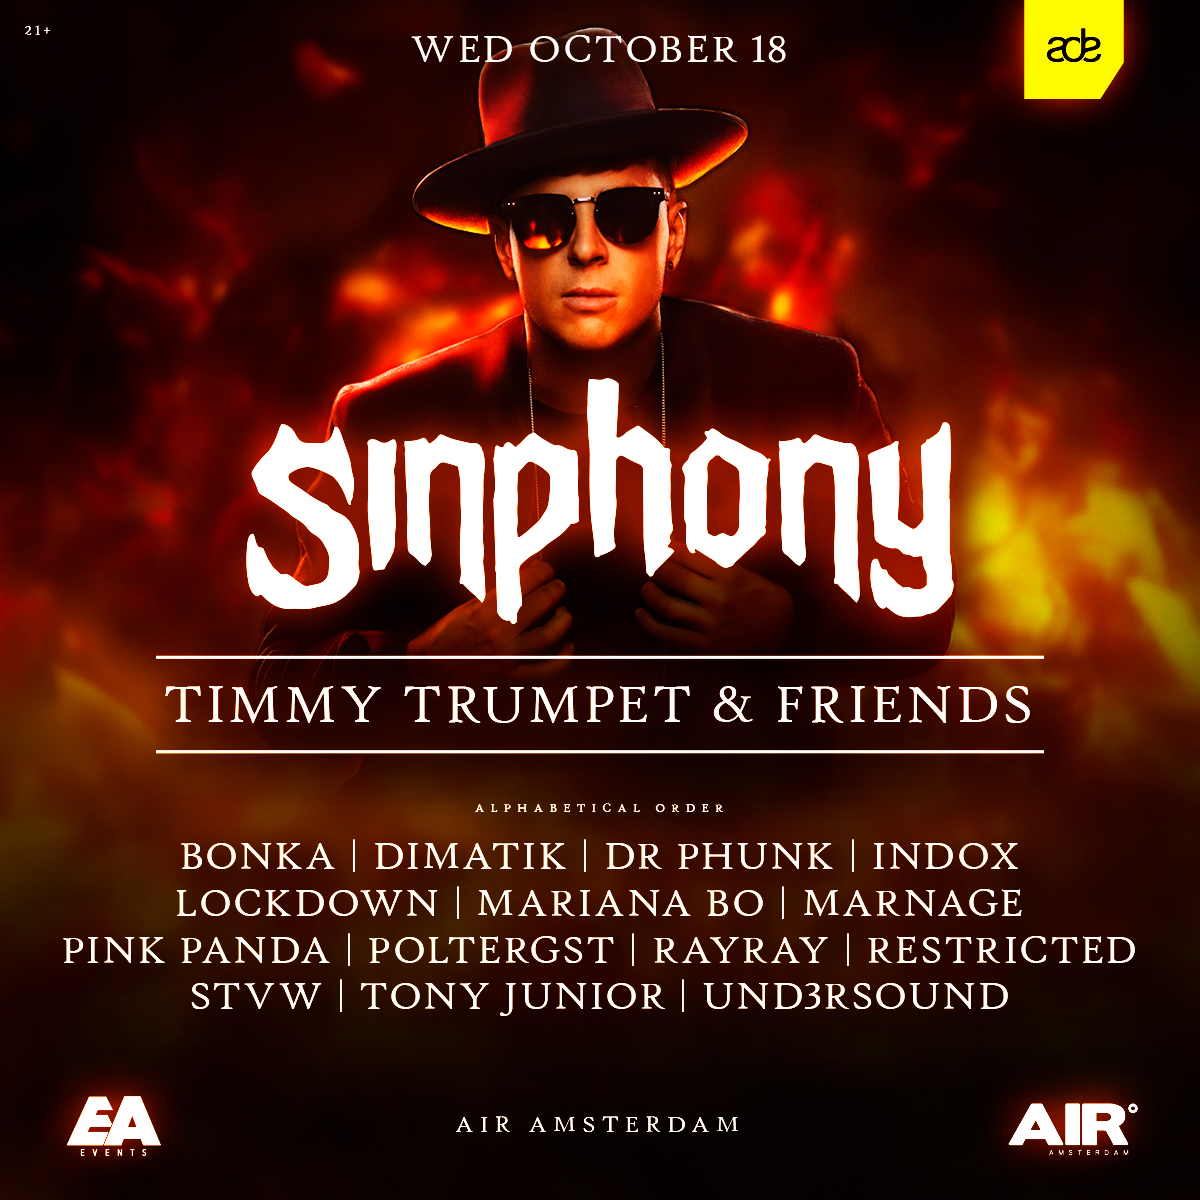 SINPHONY ADE Label Night with Timmy Trumpet & Friends at Air, Amsterdam